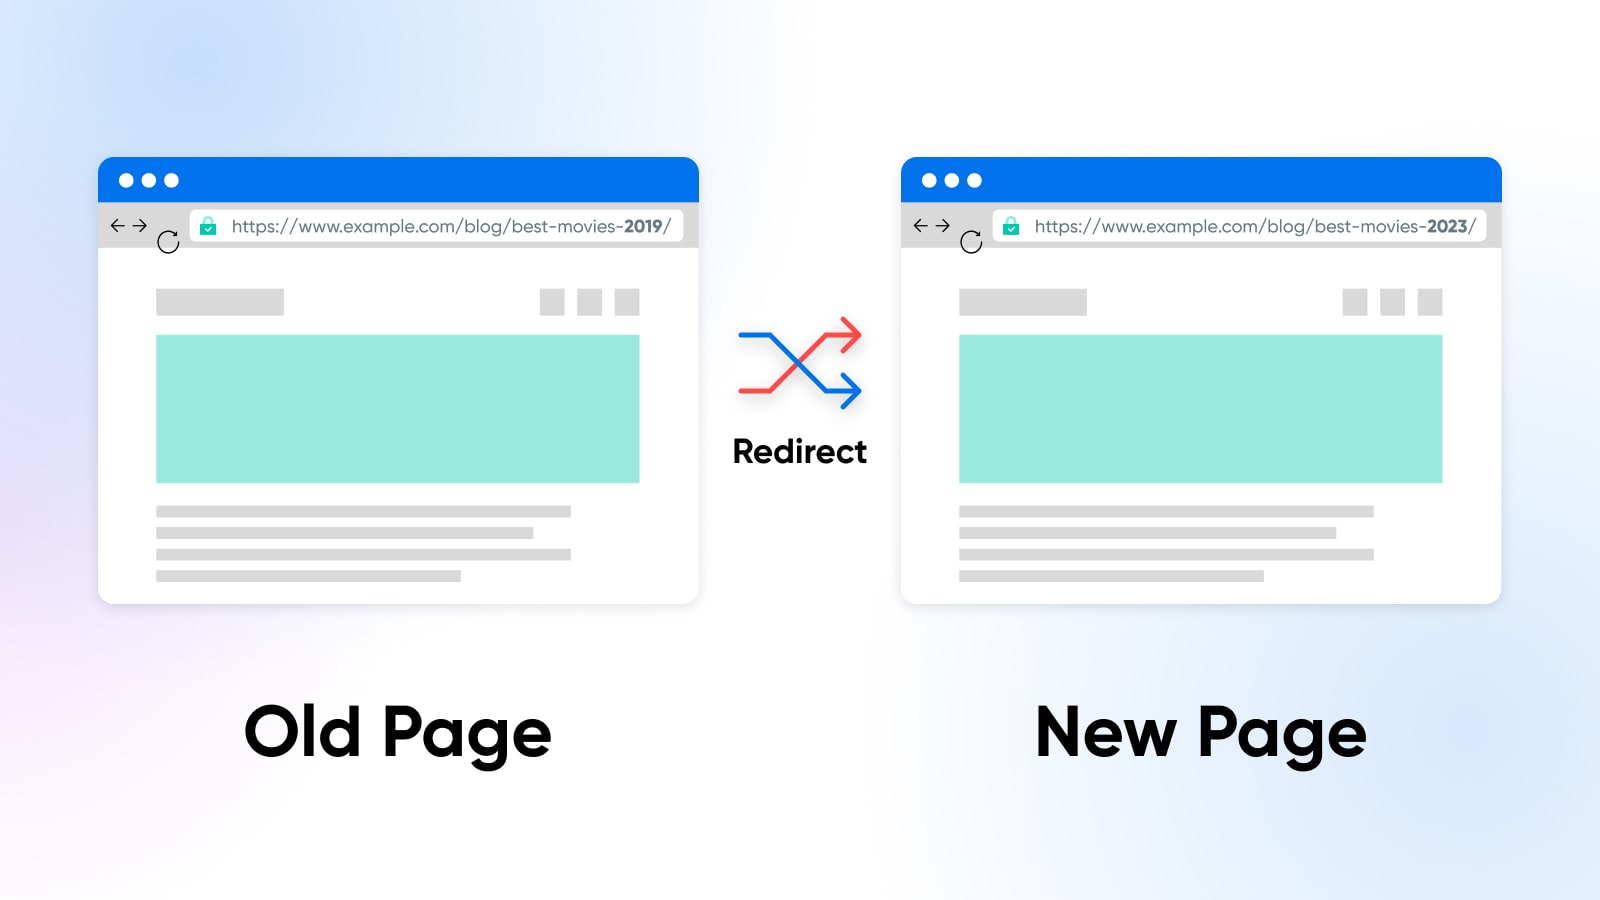 How redirect works. You can redirect your old page to a new page with related but fresher content.